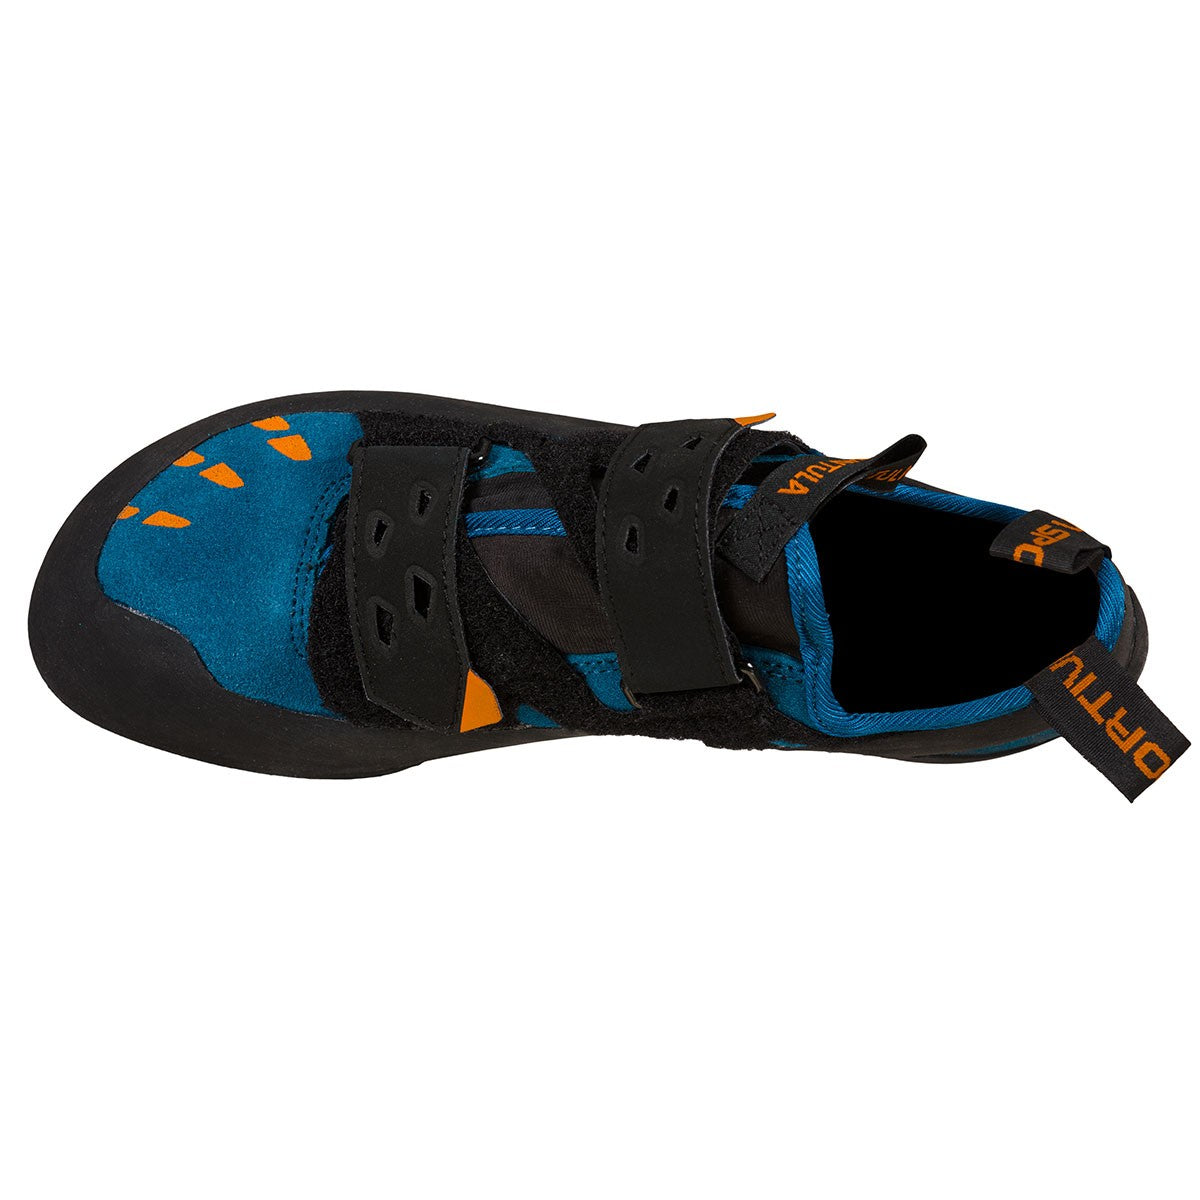 La Sportiva Tarantula in space blue/maple. view from above showing upper